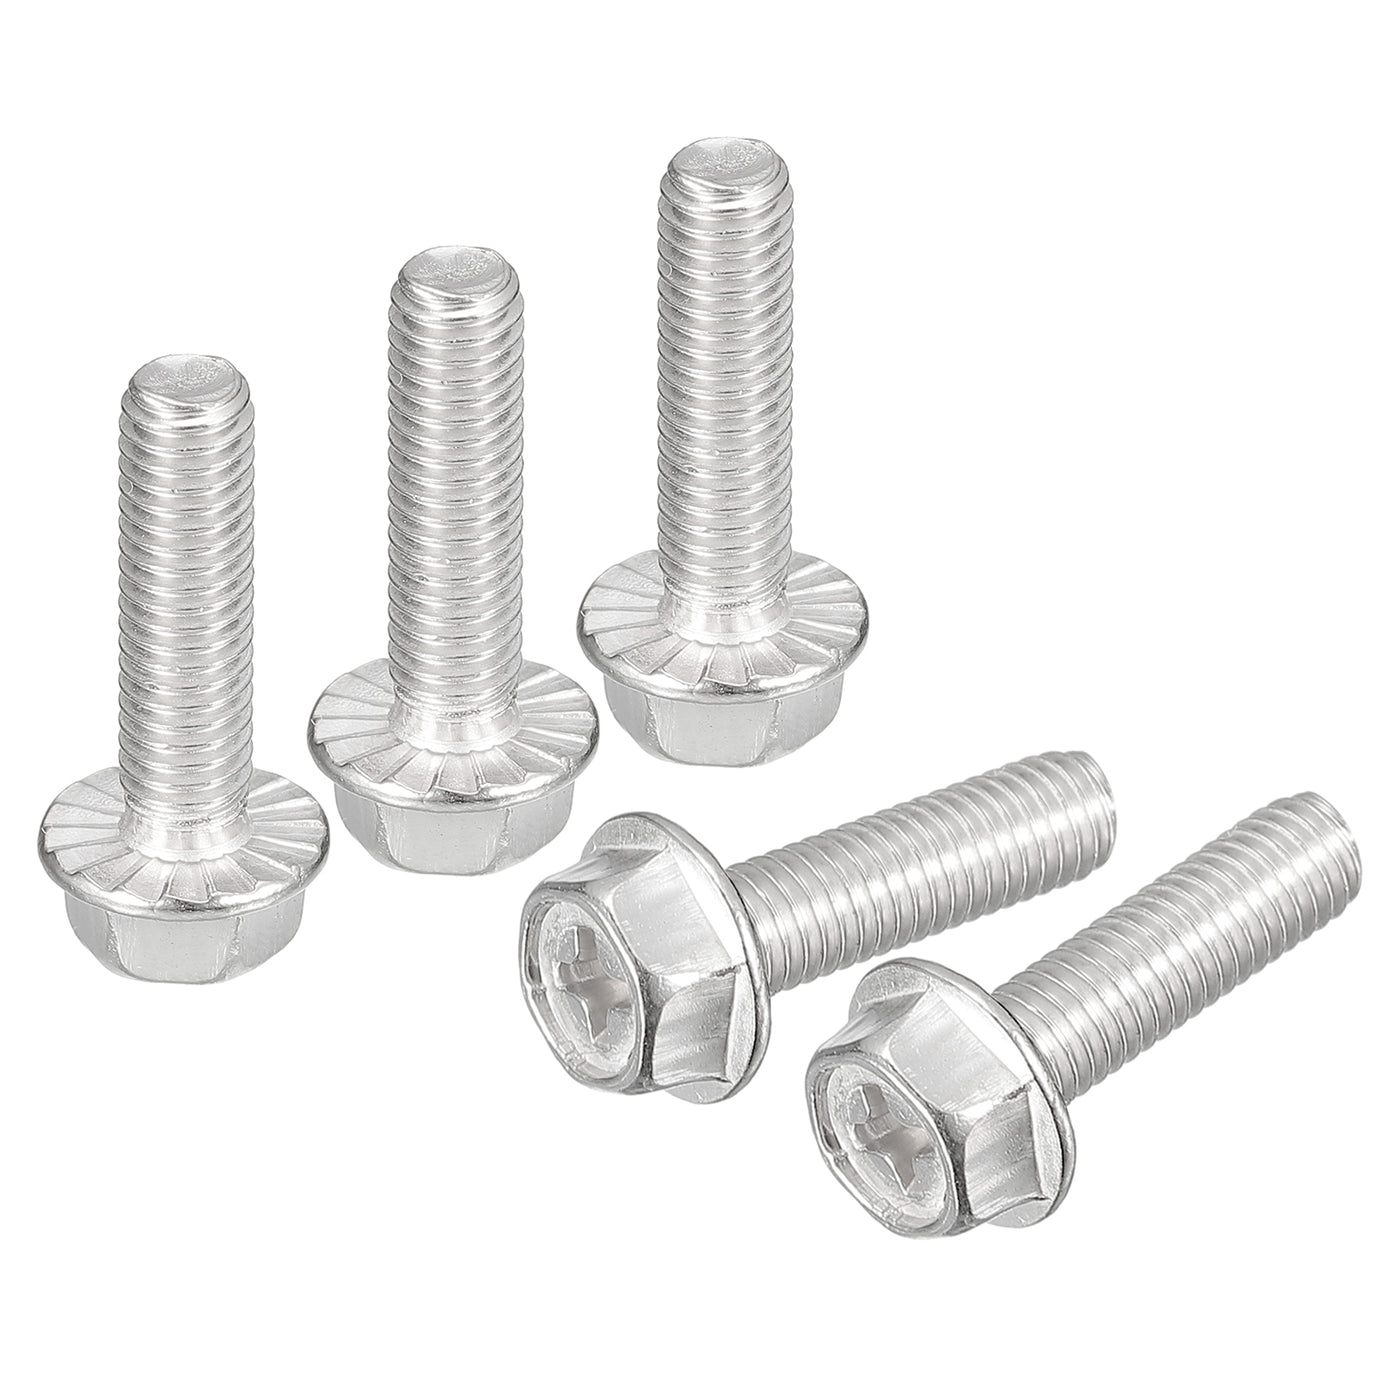 uxcell Uxcell M5x18mm Phillips Hex Head Flange Bolts, 10pcs 304 Stainless Steel Screws